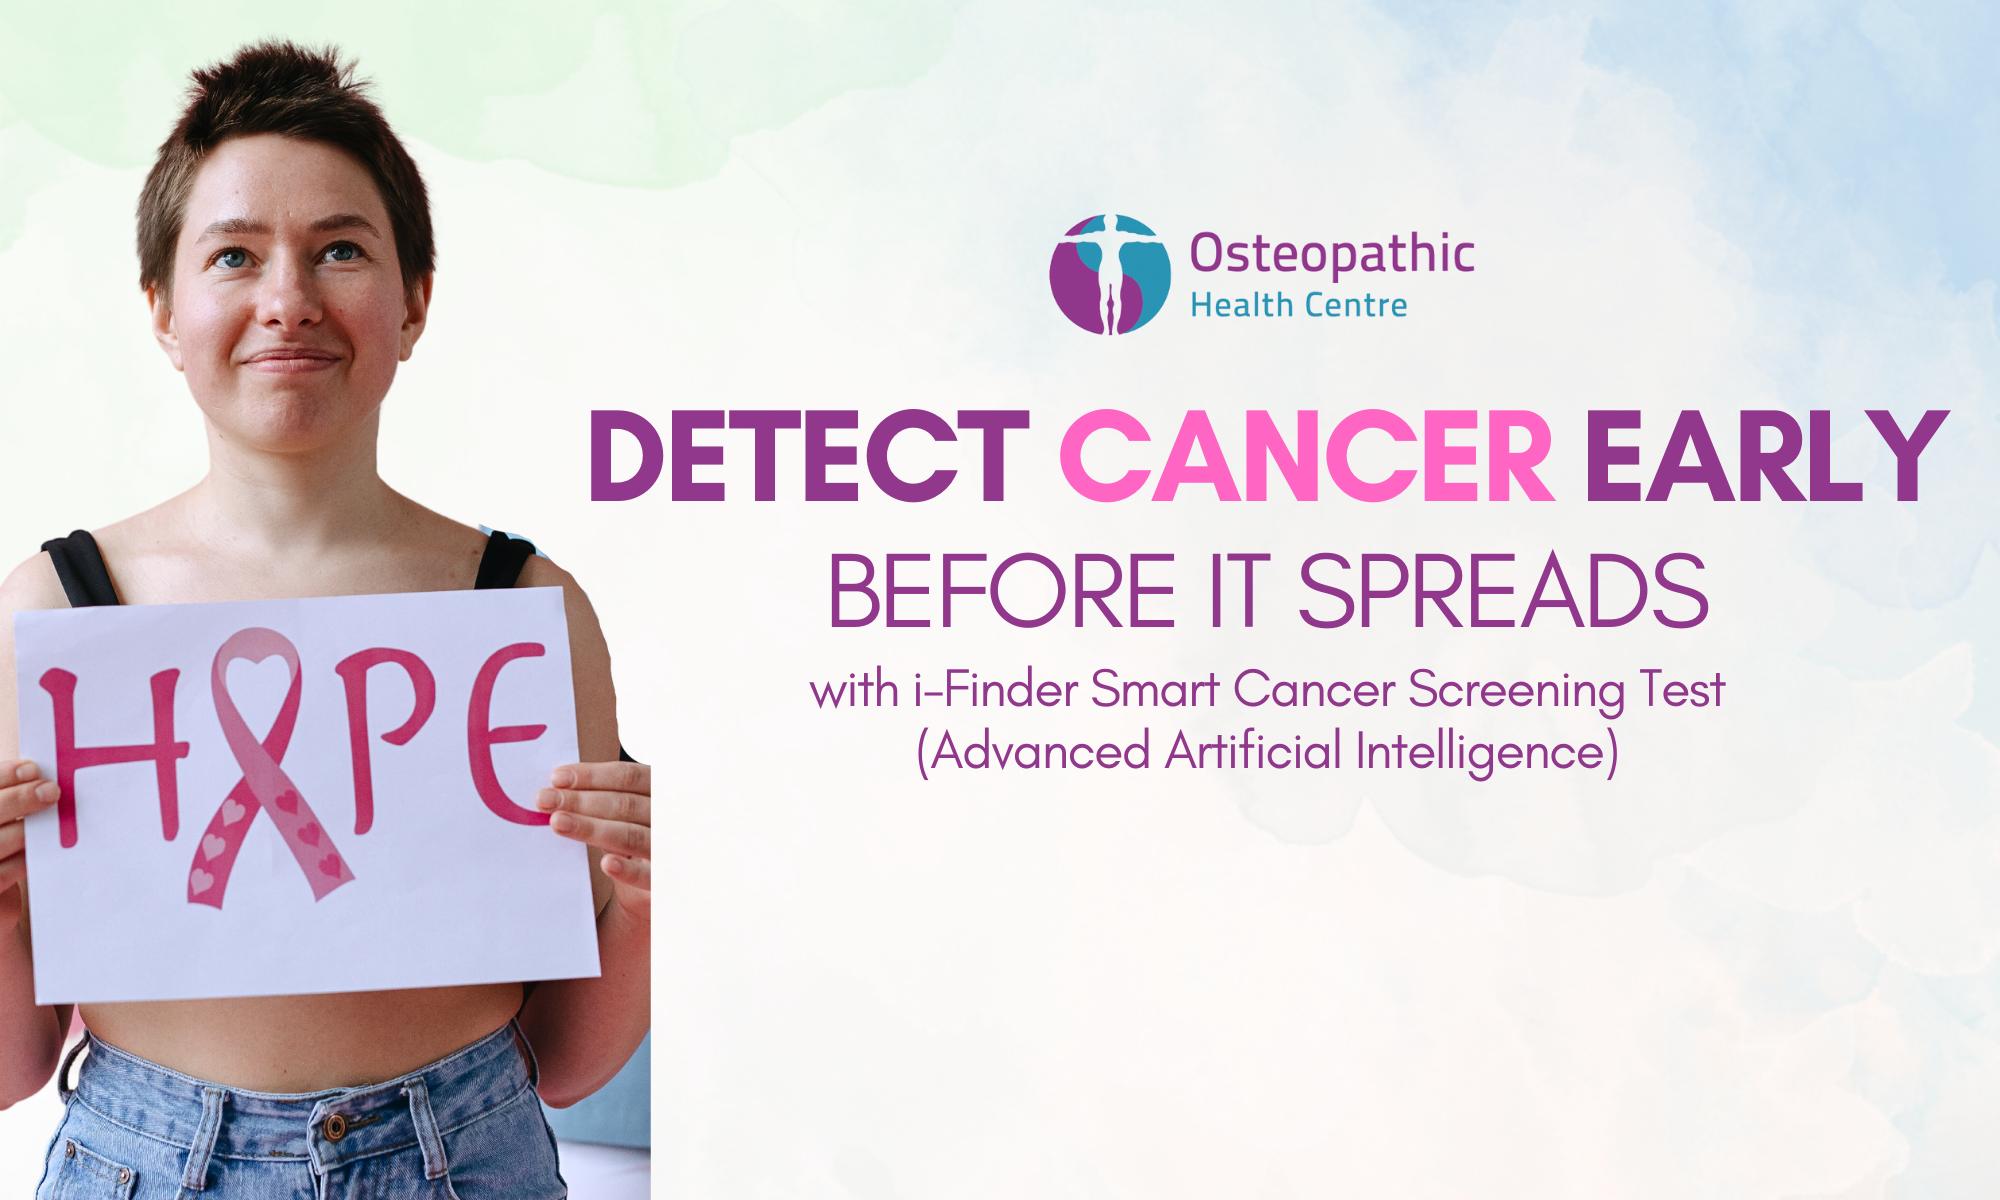 Early Detection of Cancer using Advanced A.I